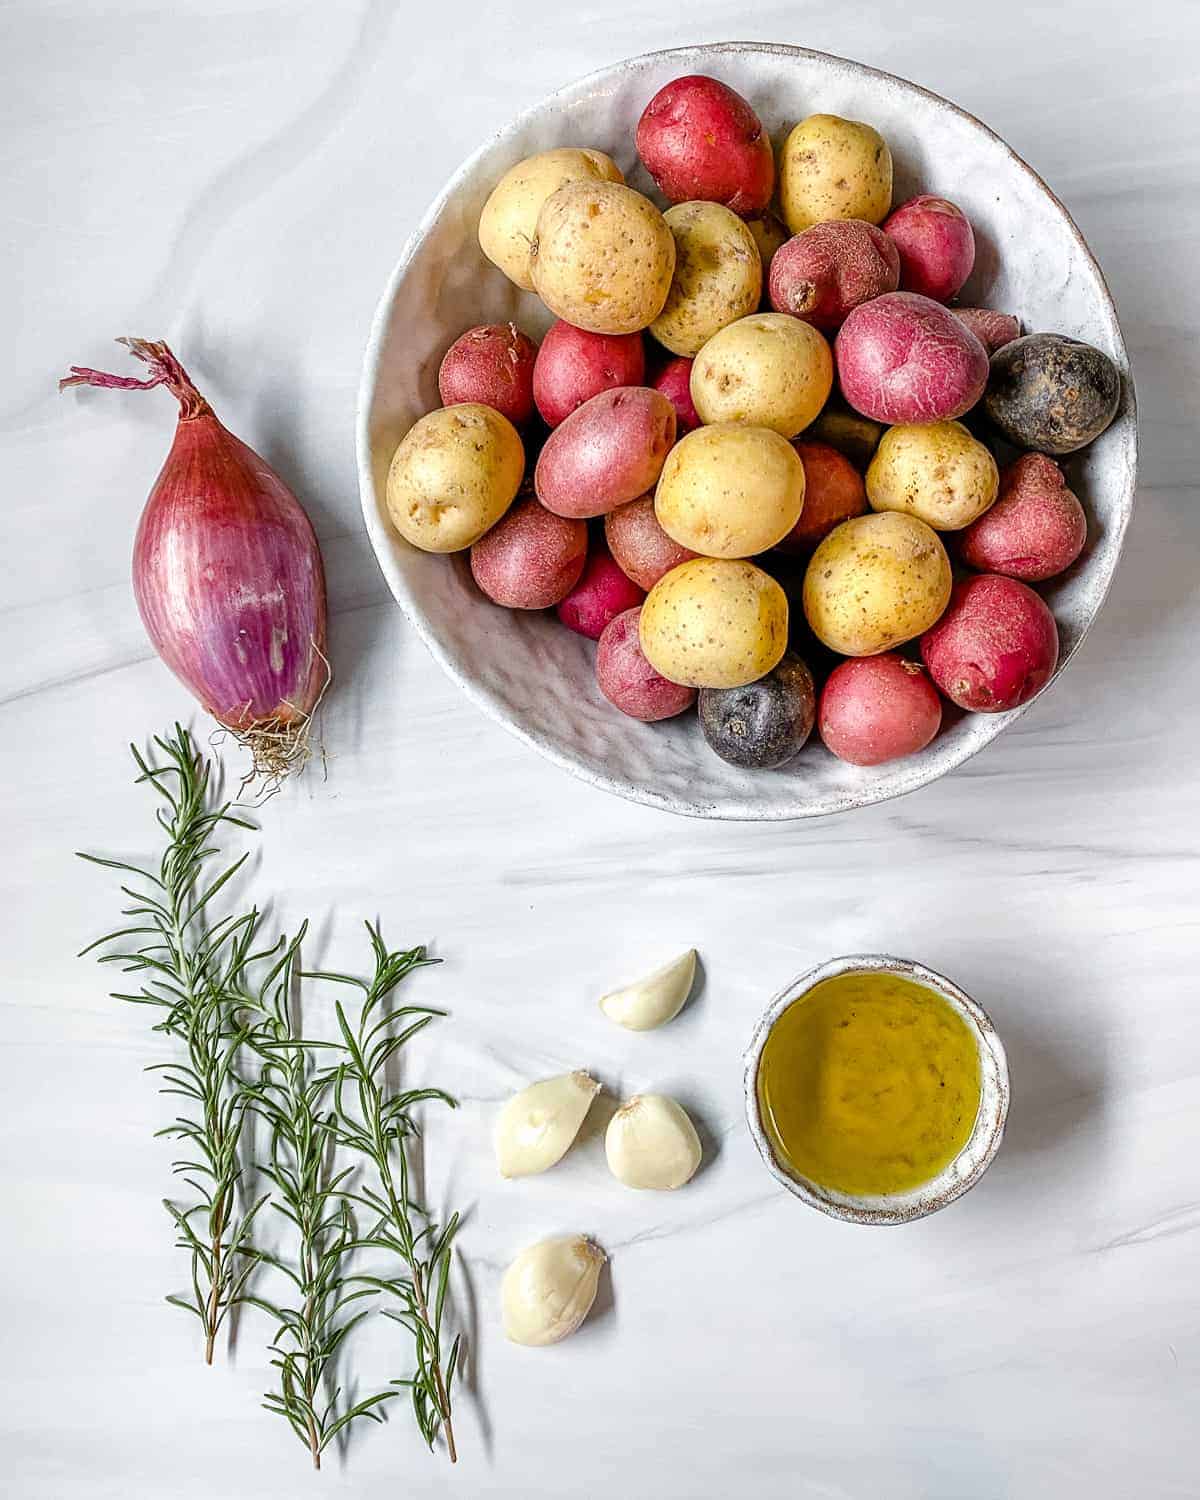 ingredients for Roasted Rosemary Potatoes measured out against a white surface